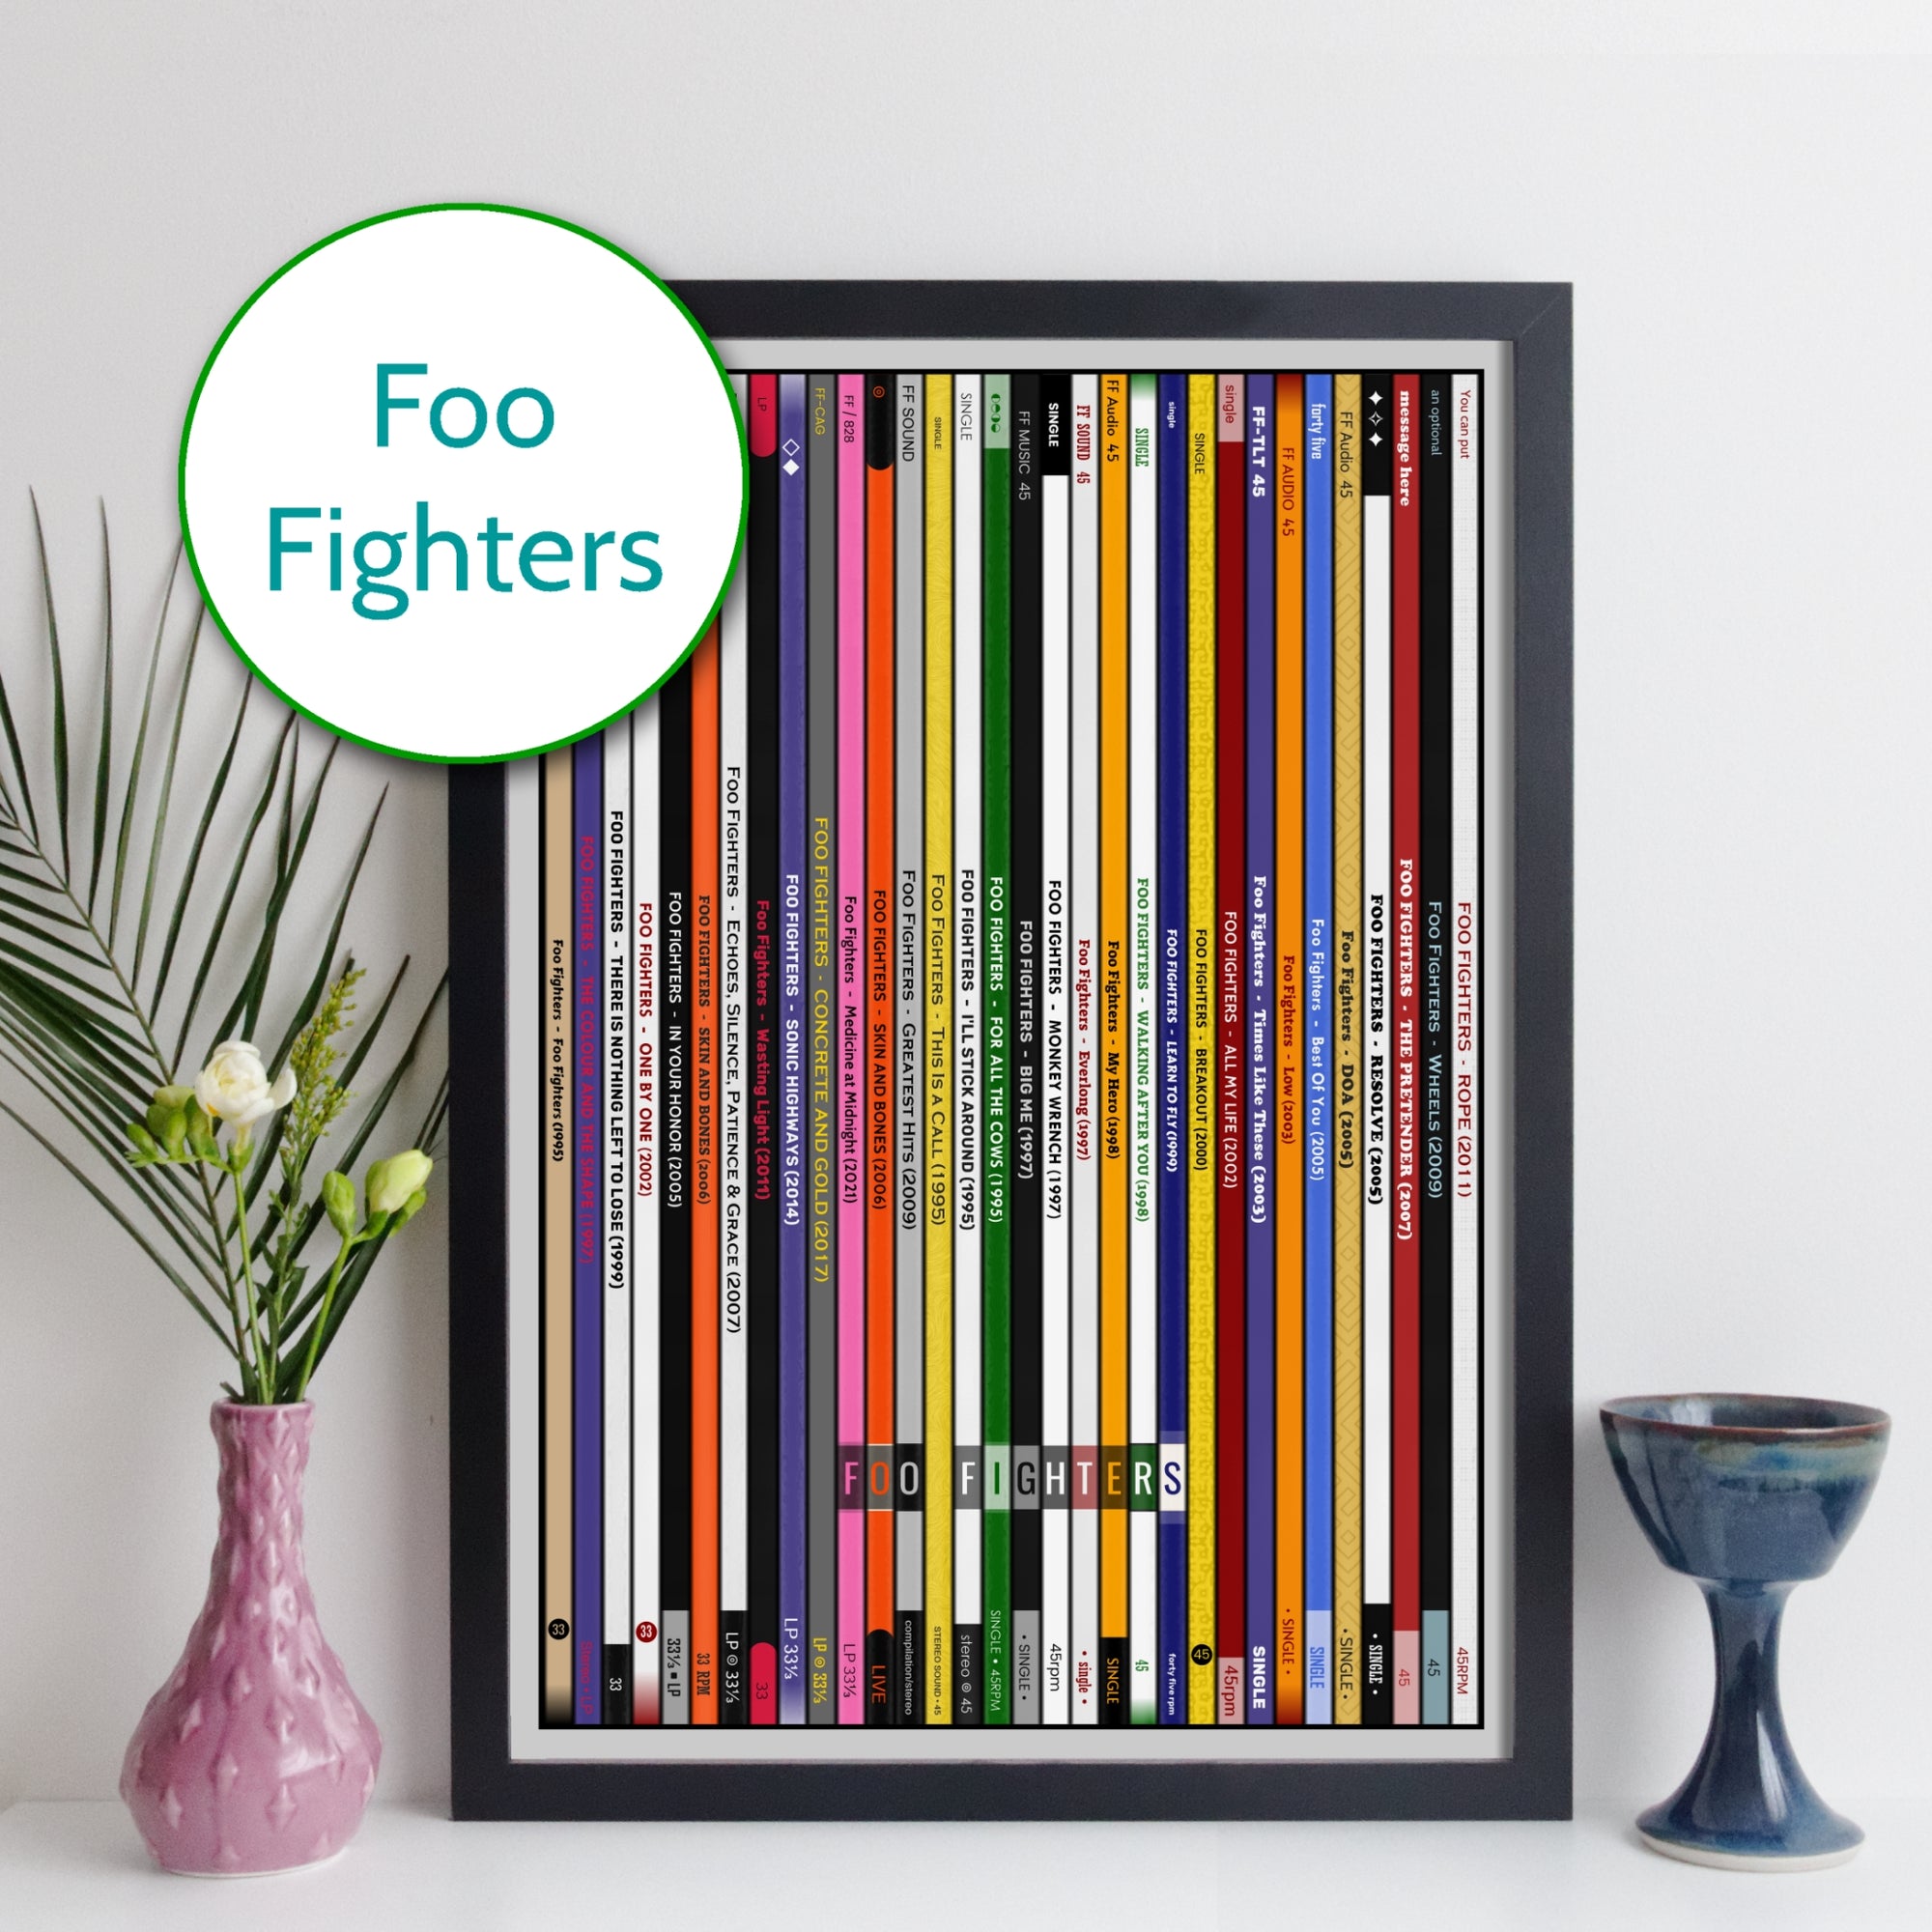 Foo Fighters Collection